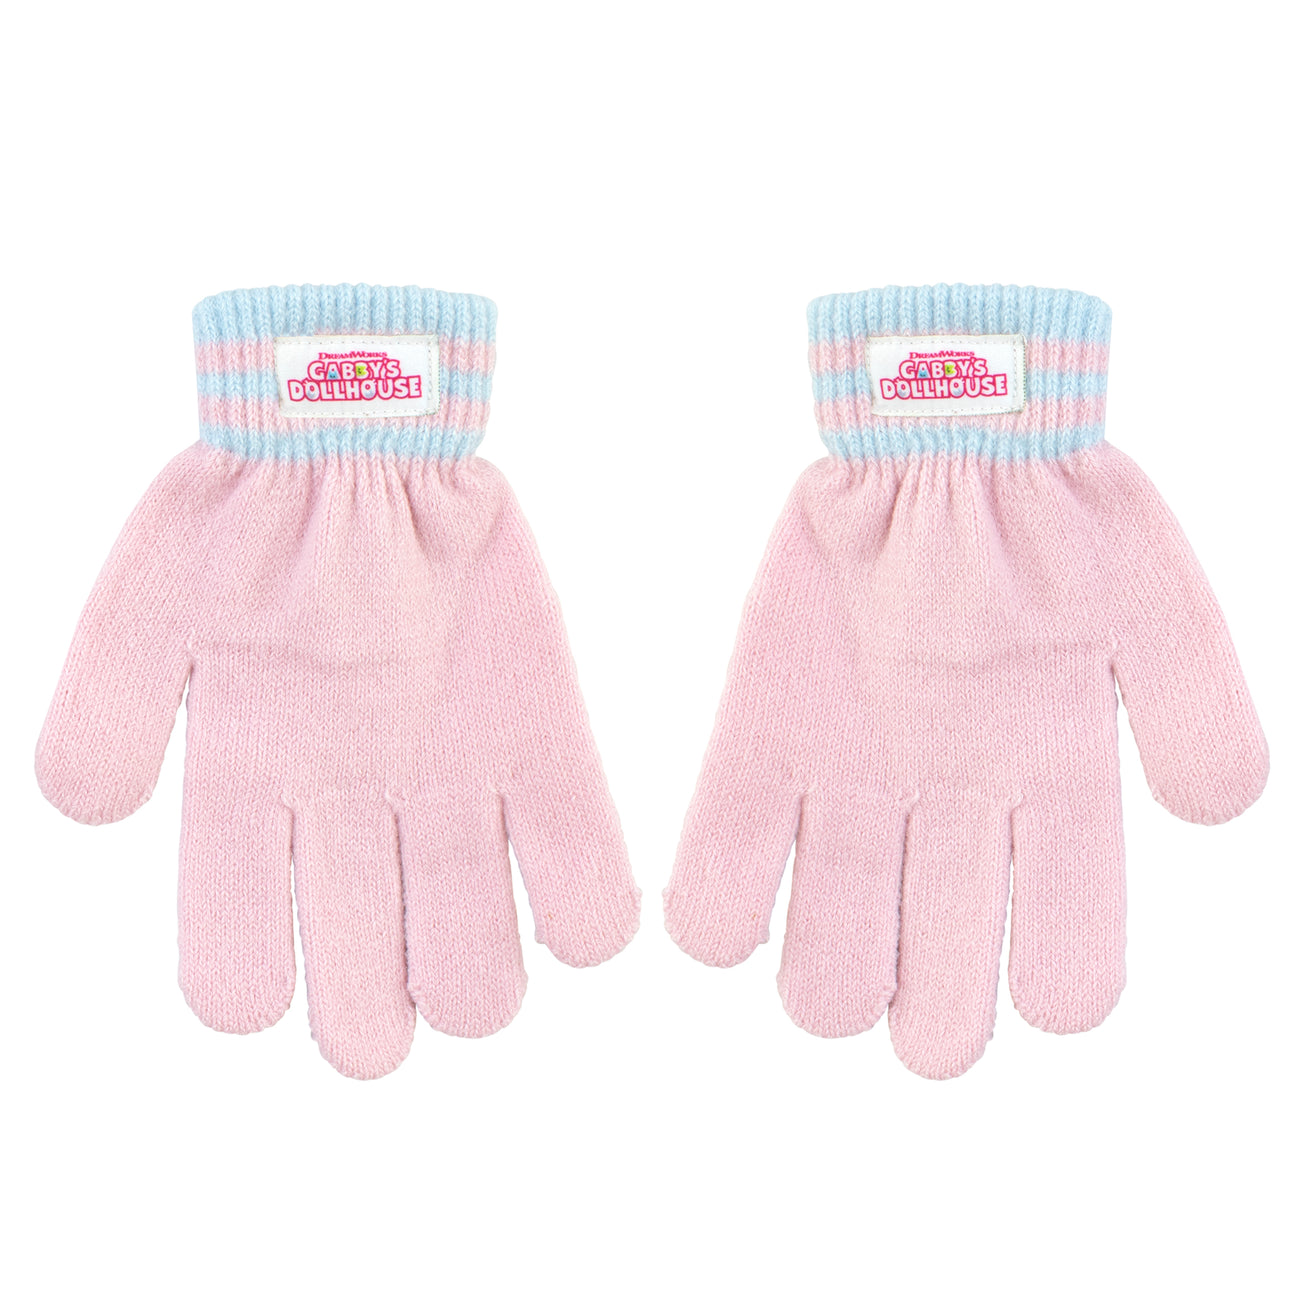 Gabby's Dollhouse Winter Hat and Glove Set | Kids | Character.com